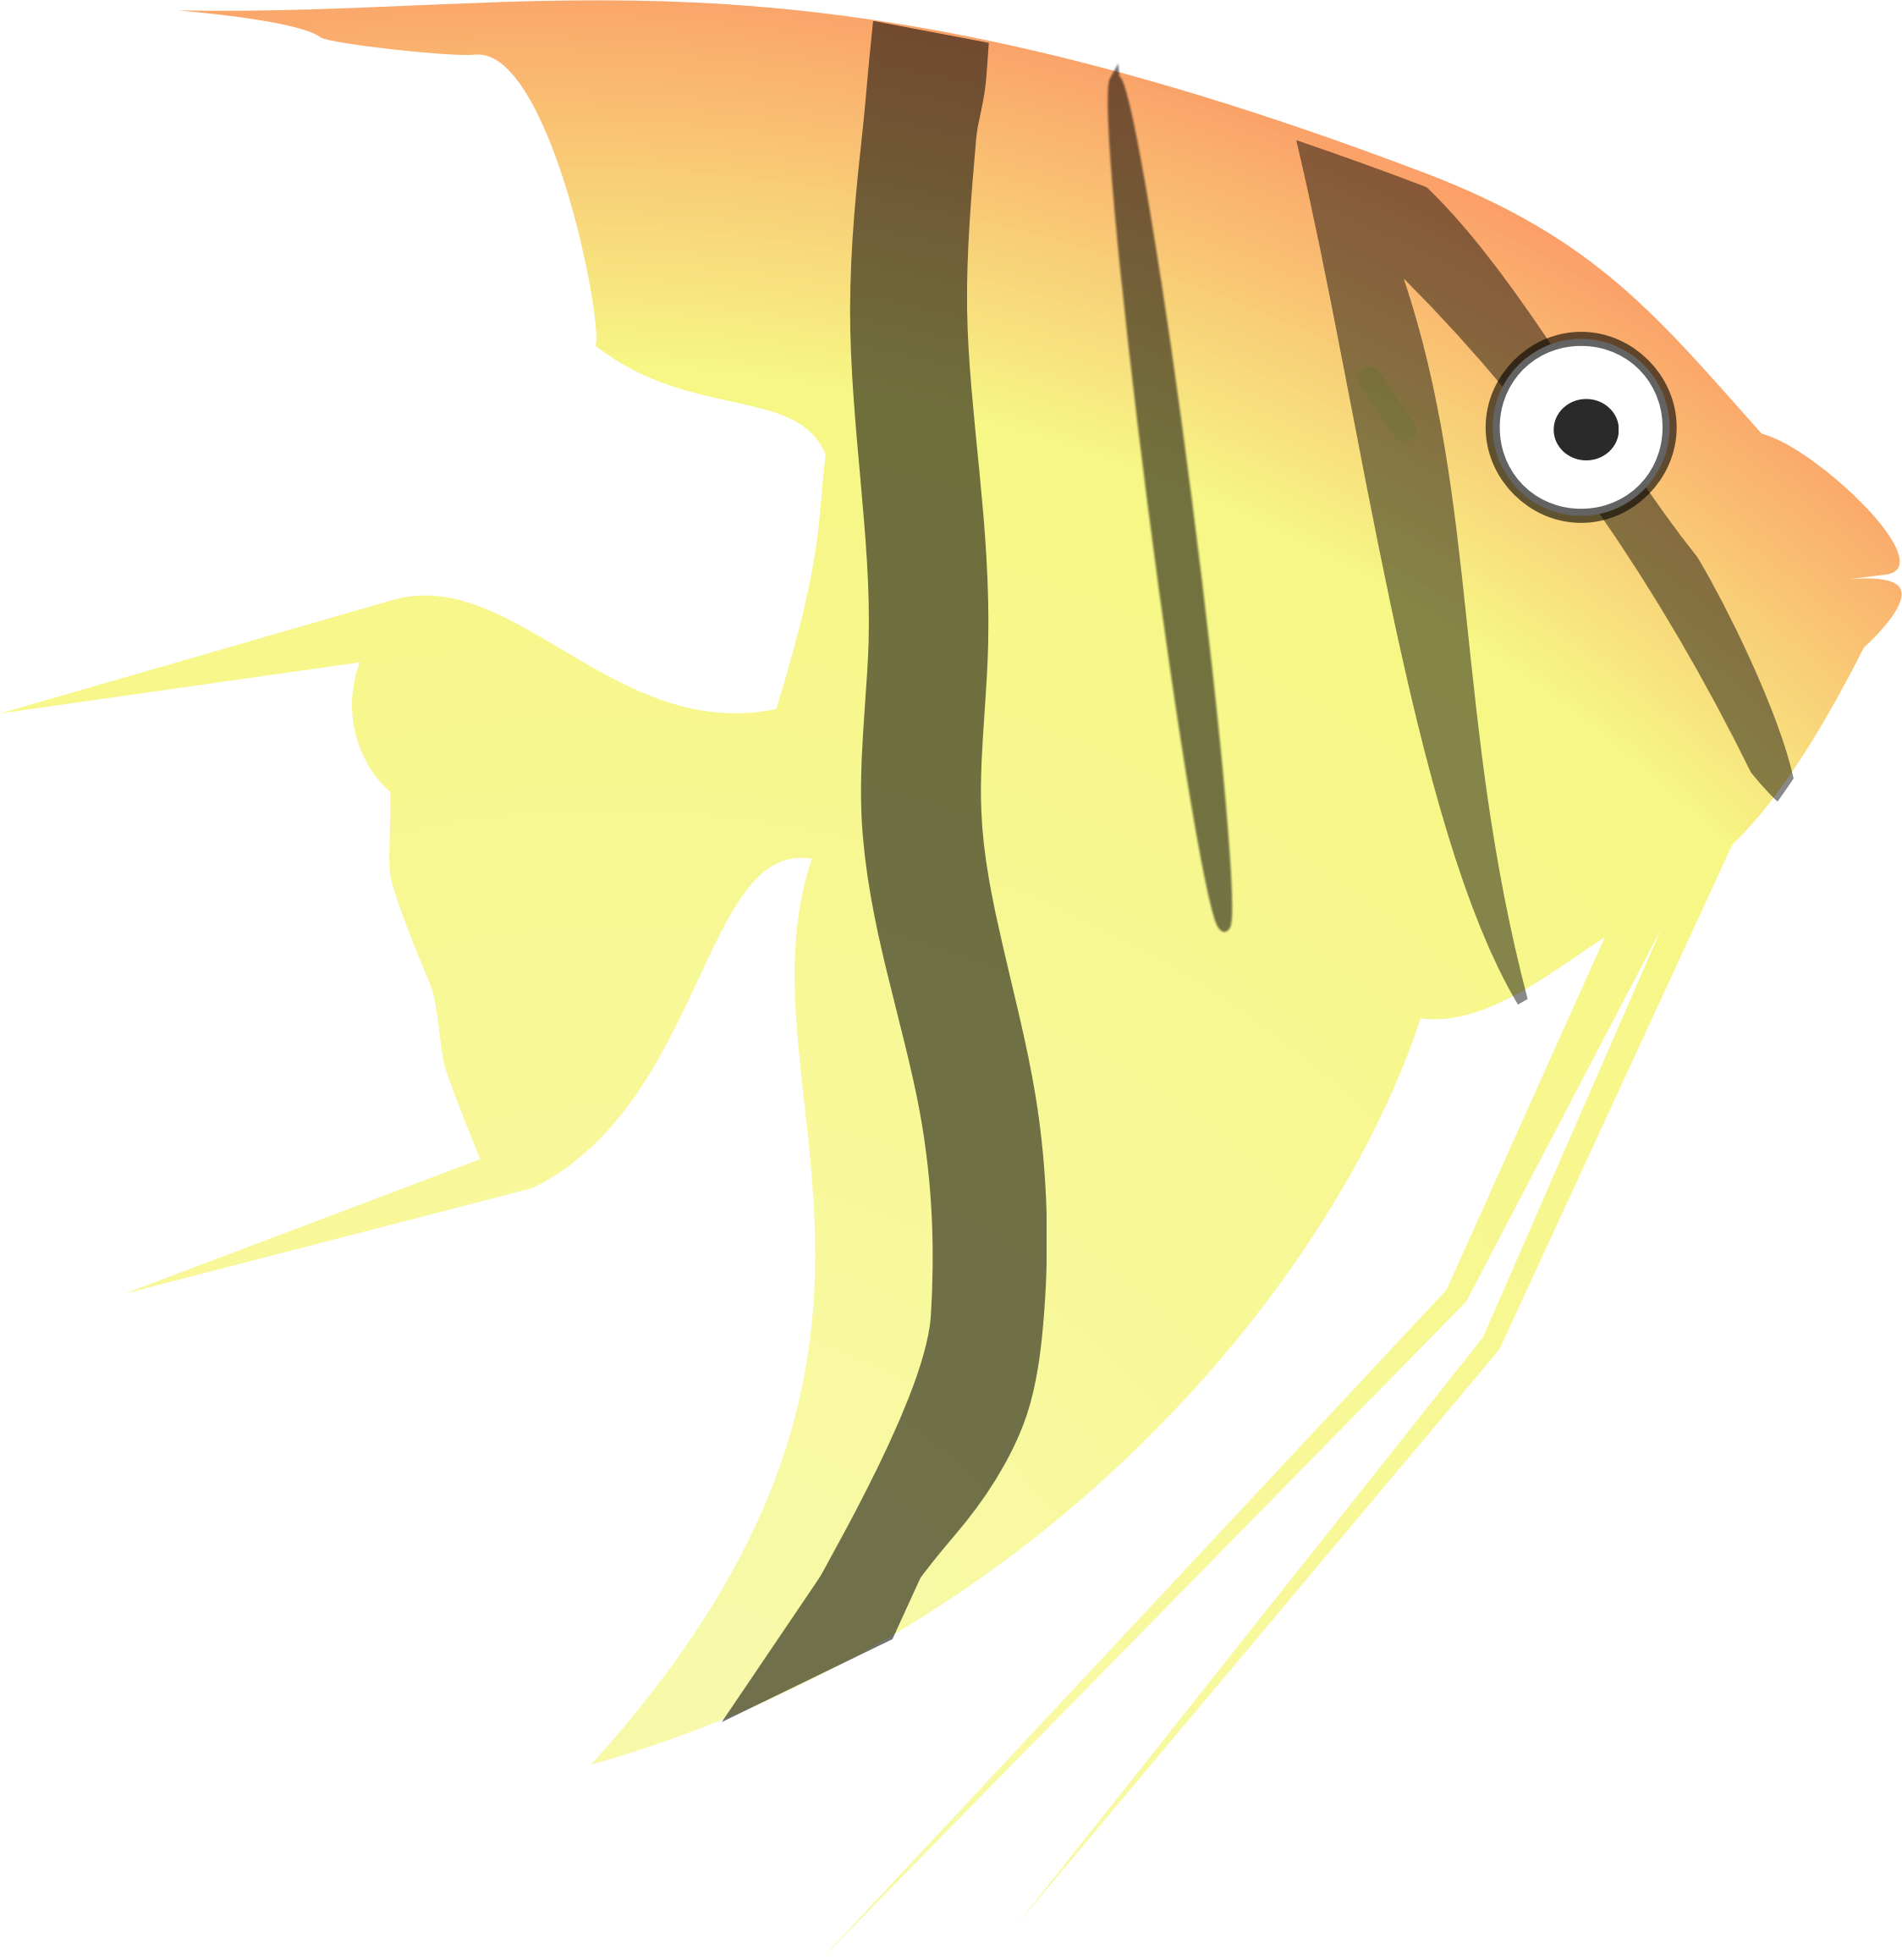 Download Cartoon Angelfish vector clipart image - Free stock photo - Public Domain photo - CC0 Images